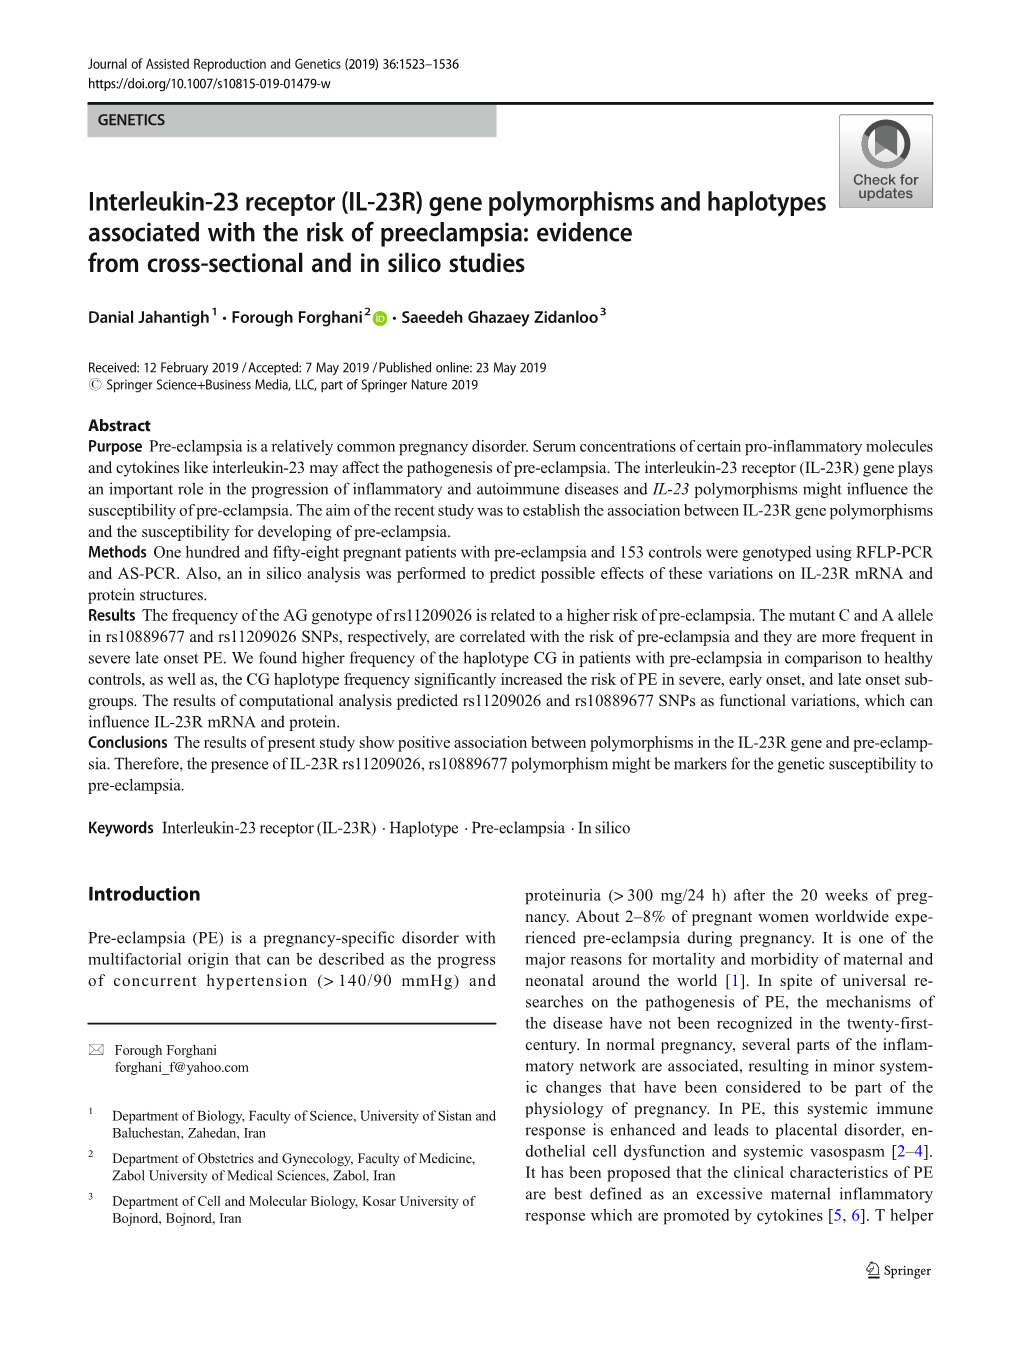 Interleukin-23 Receptor (IL-23R) Gene Polymorphisms and Haplotypes Associated with the Risk of Preeclampsia: Evidence from Cross-Sectional and in Silico Studies